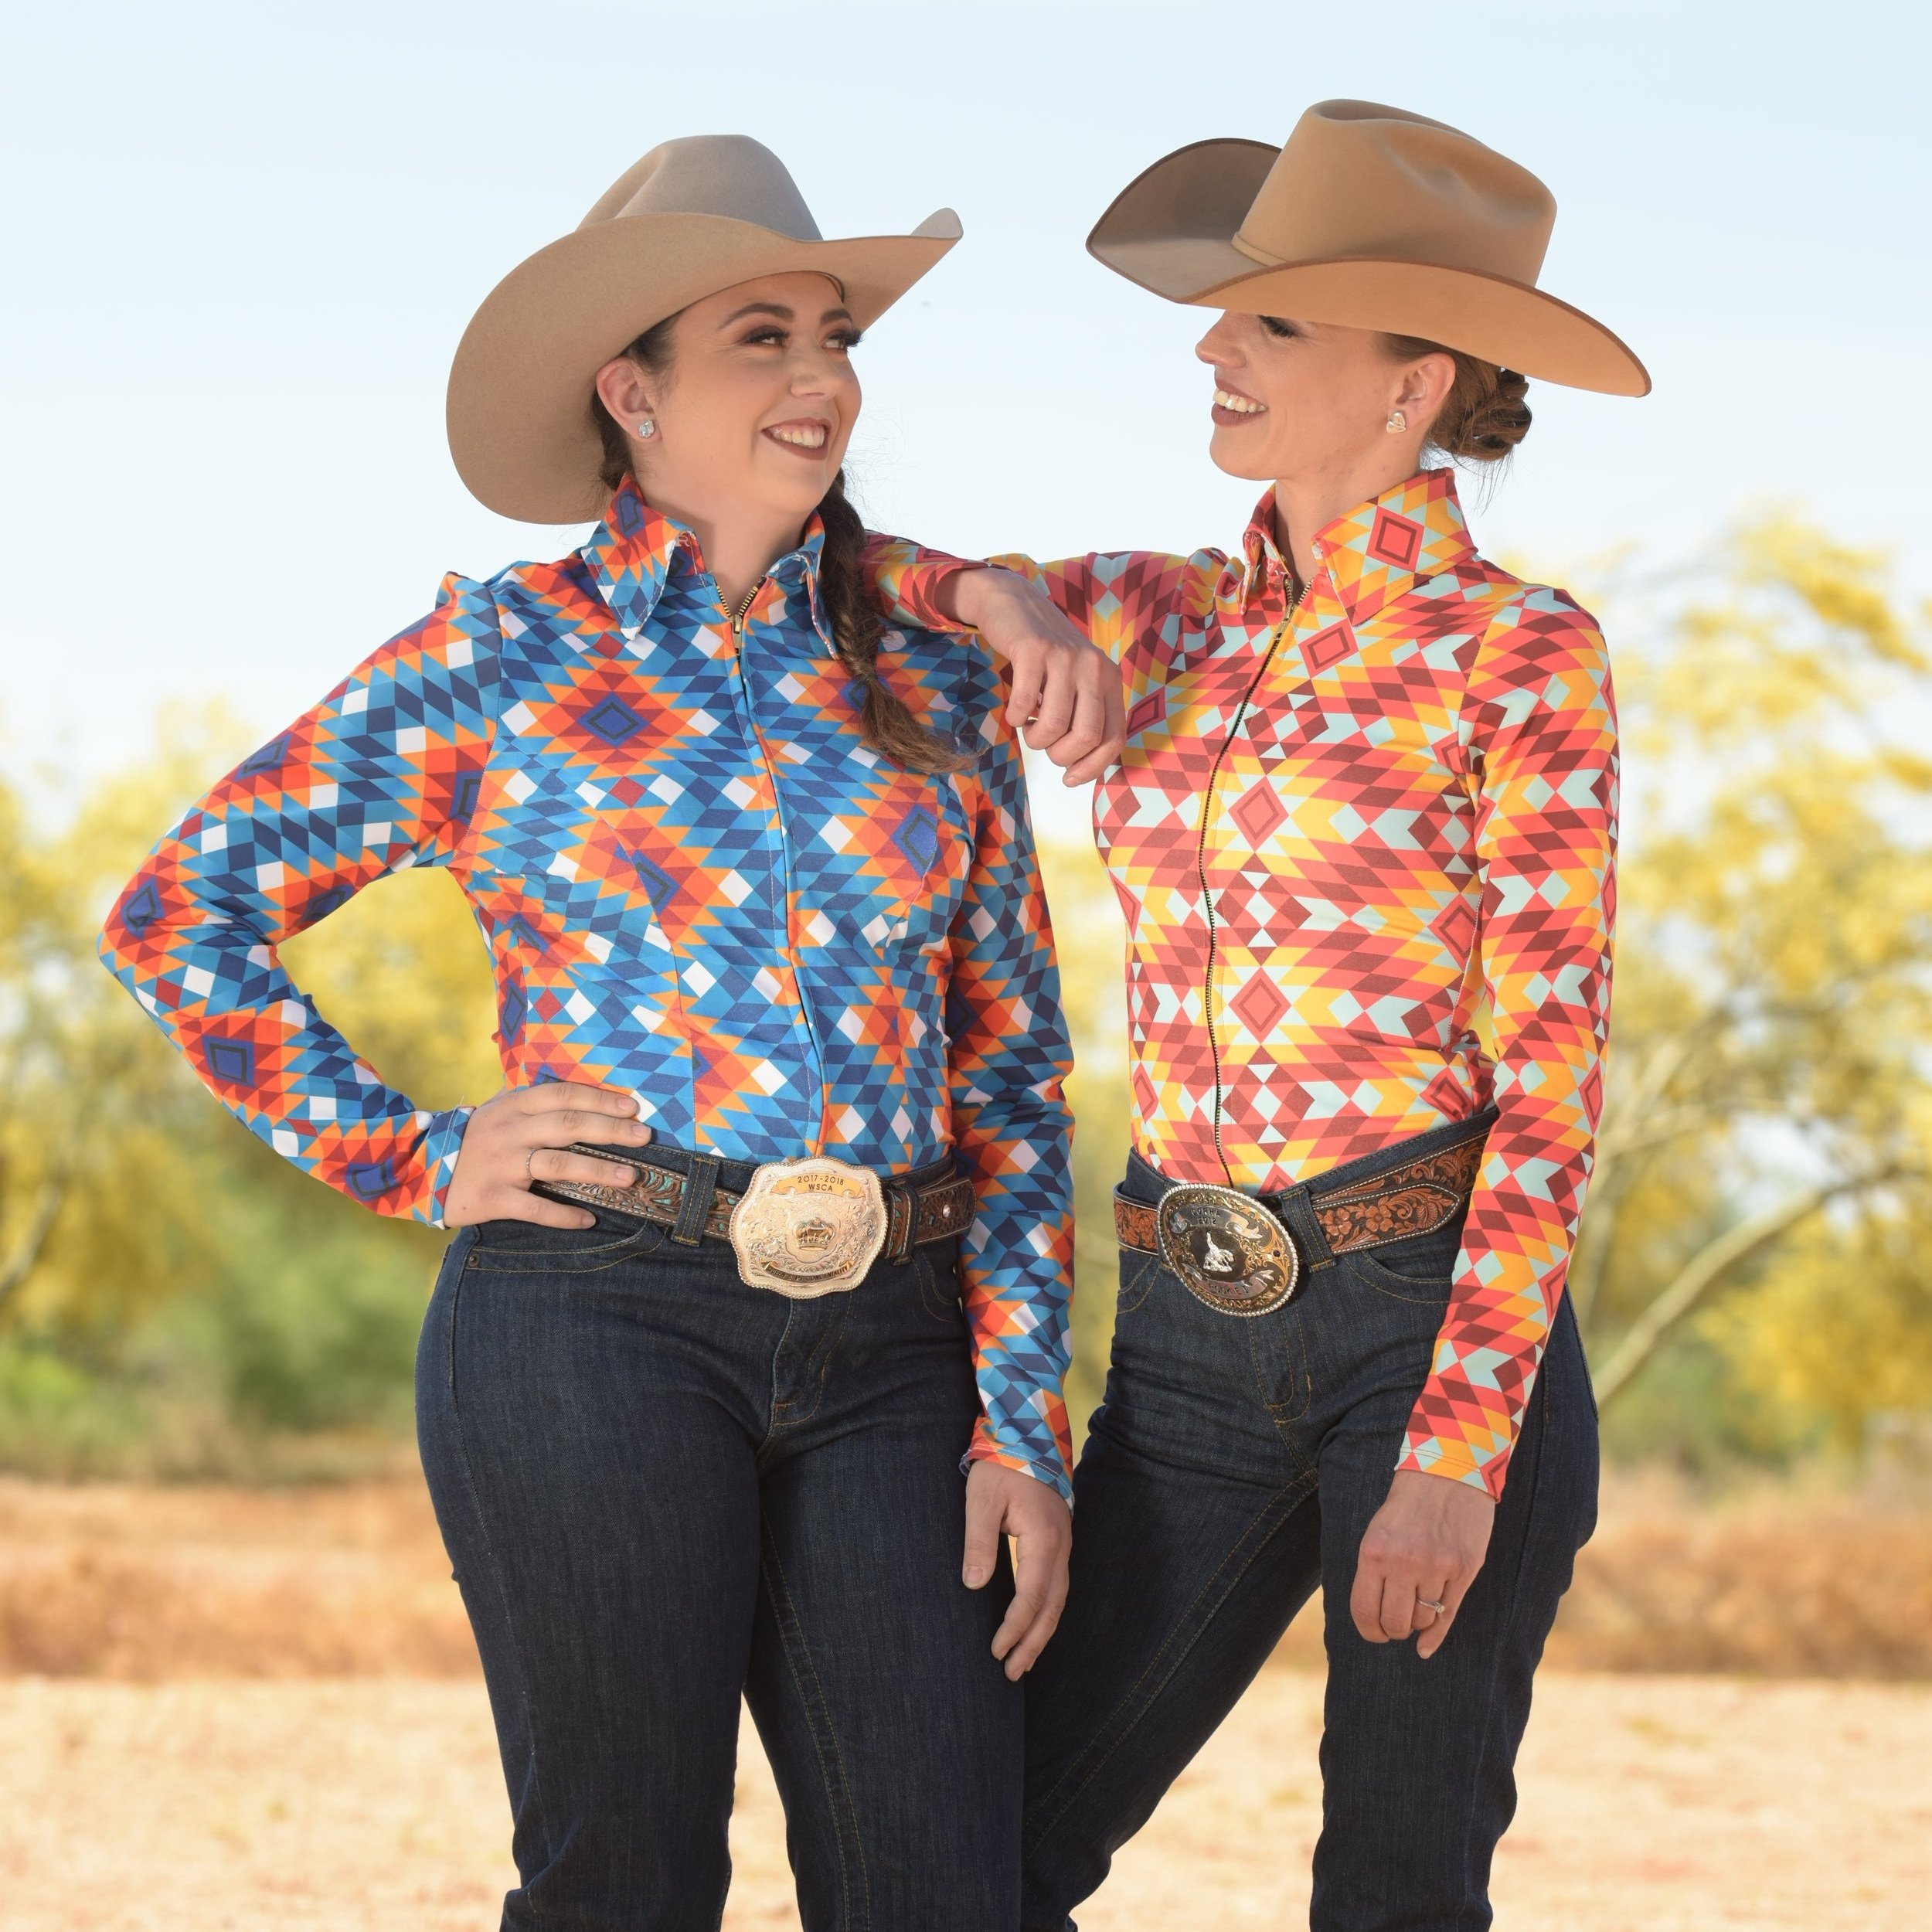 sparkle-ridge-womens-western-wear-with-bling-rodeo-shirts-horse-show-clothing.JPG (Copy)